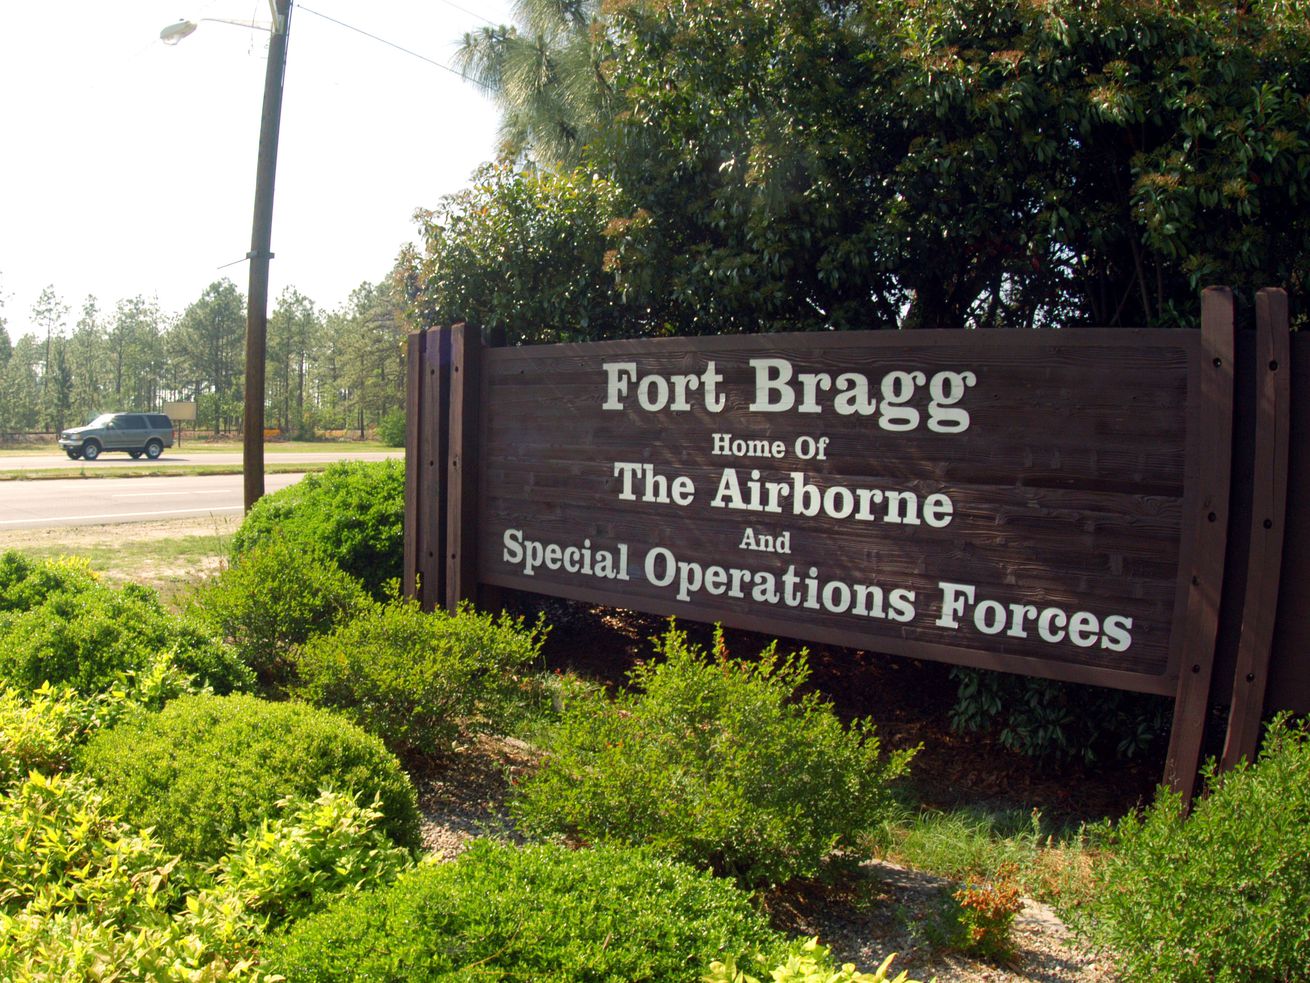 A sign shows Fort Bragg information May 13, 2004 in Fayettville, North Caro...